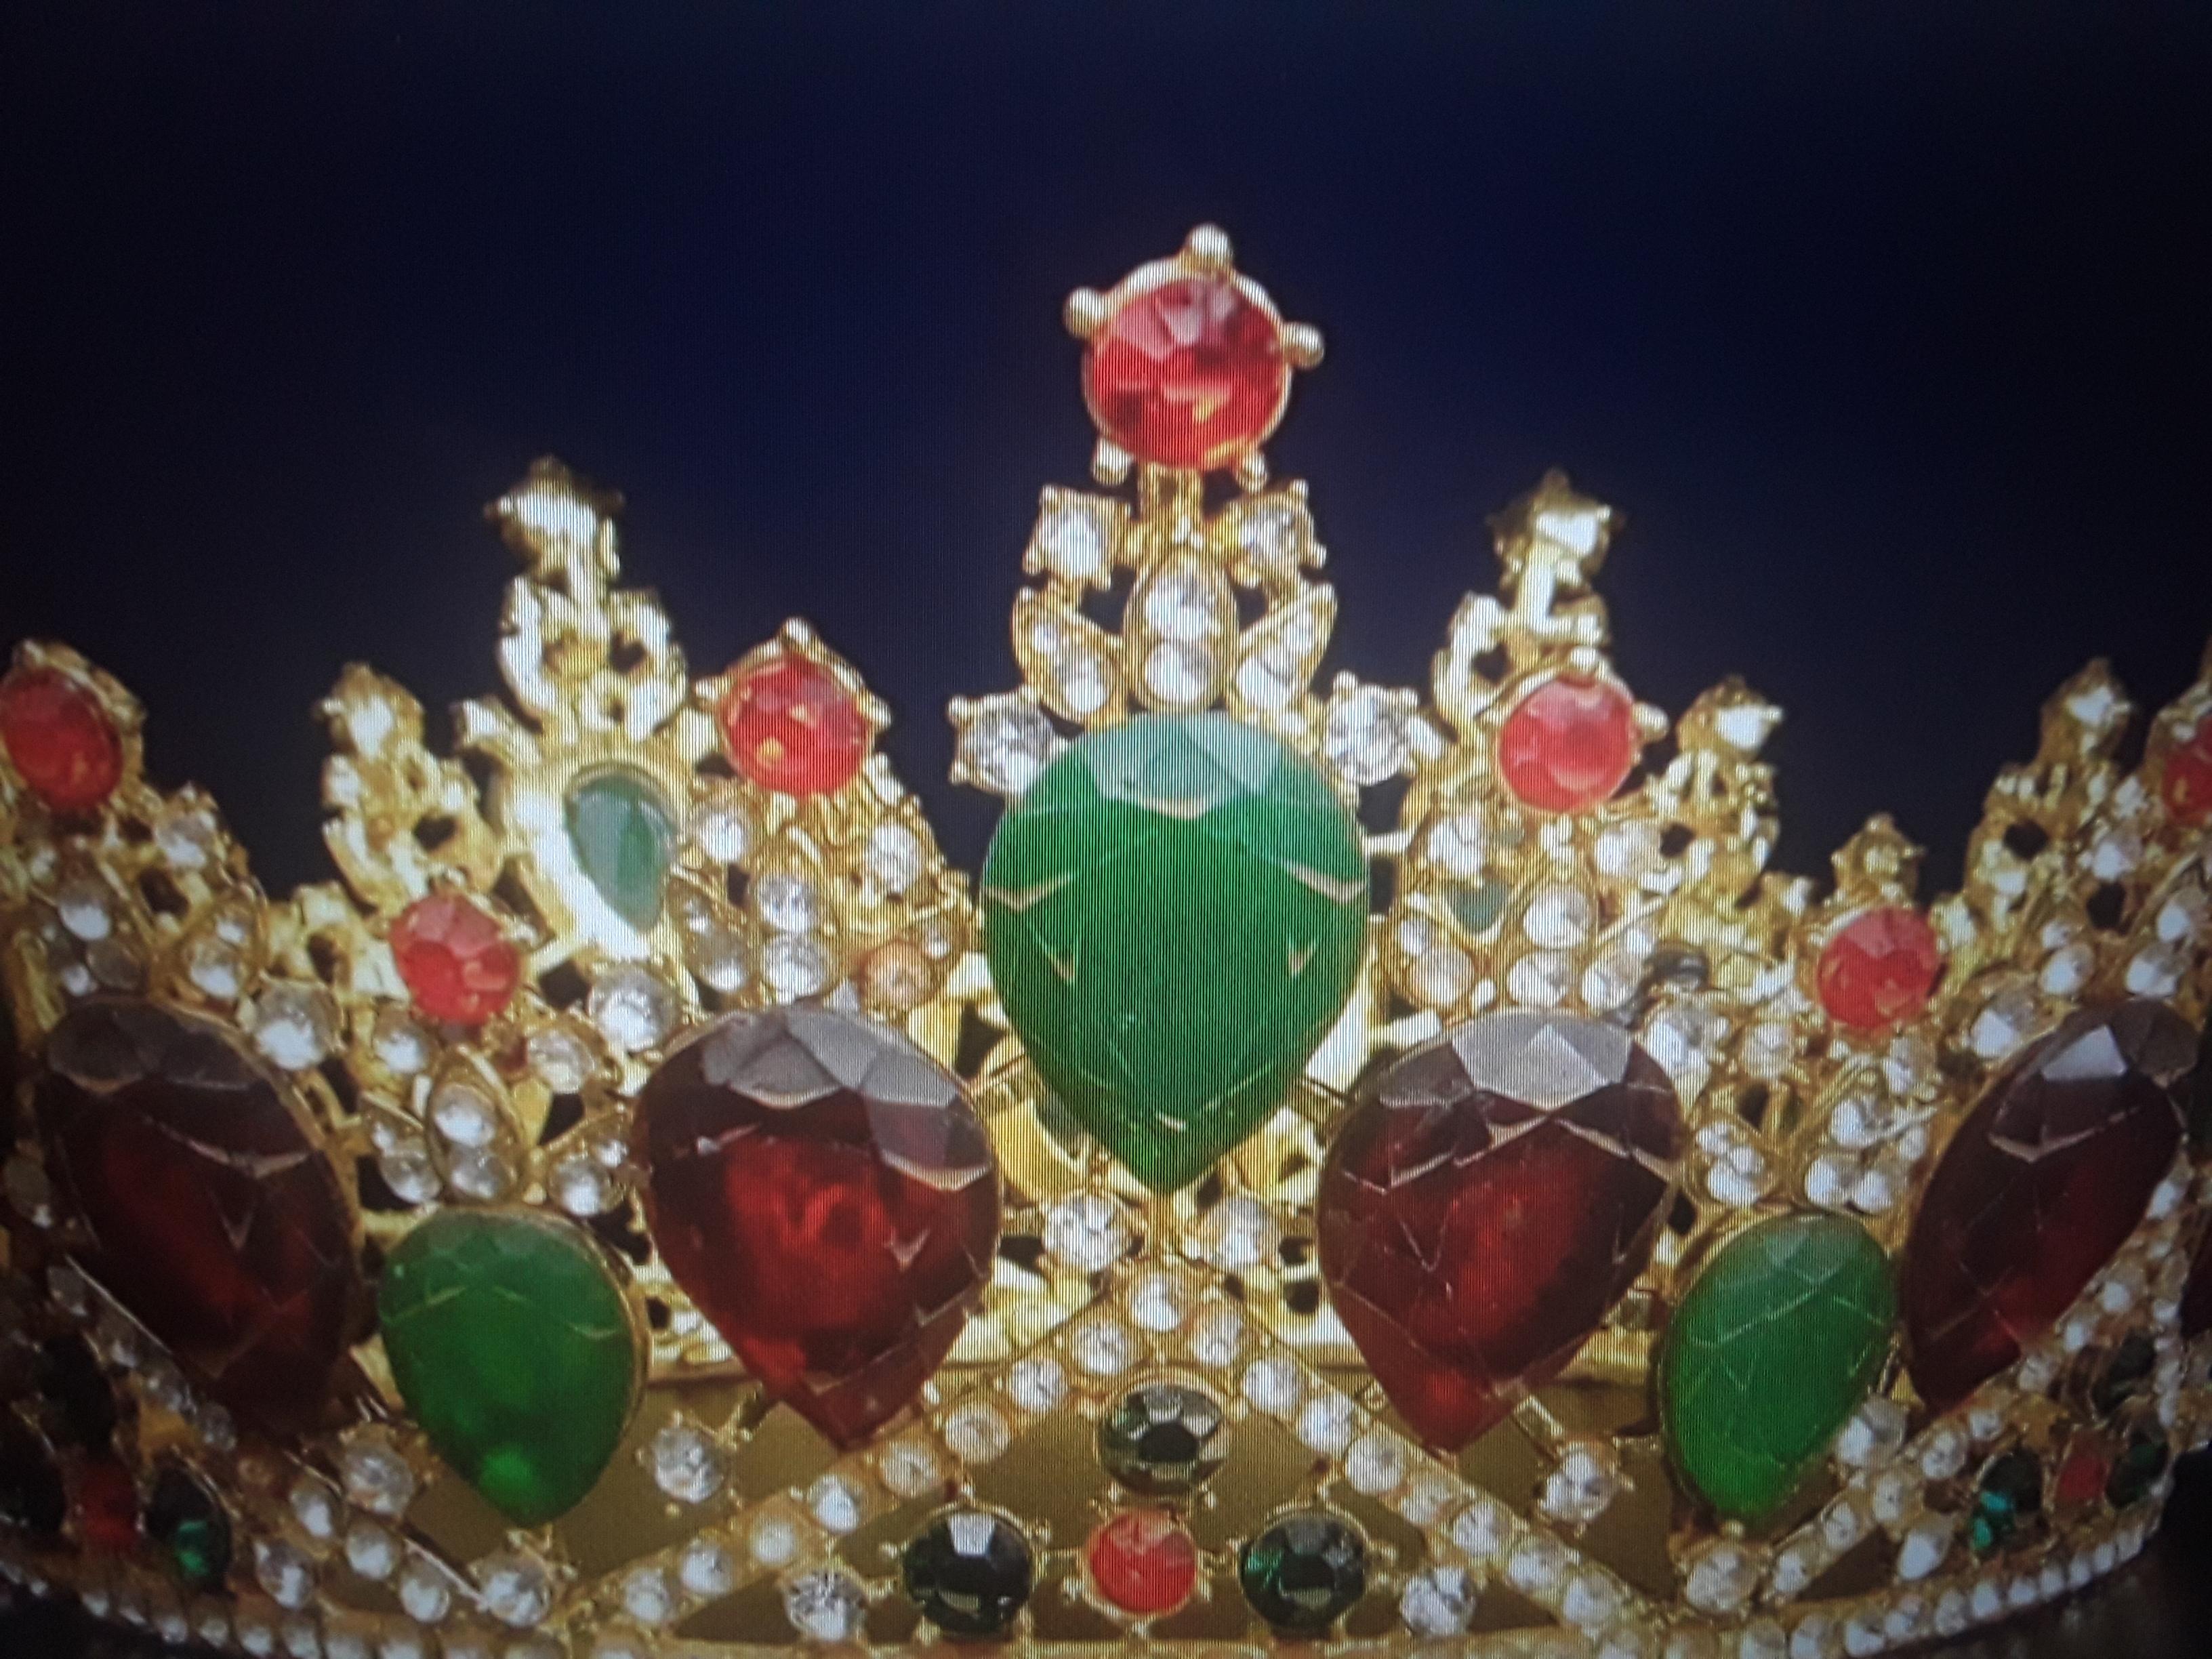 Early 20th Century Antique Gilt Bronze/ Red w/Green Jewelled Royal Tiara- Collectors Piece/ Britain